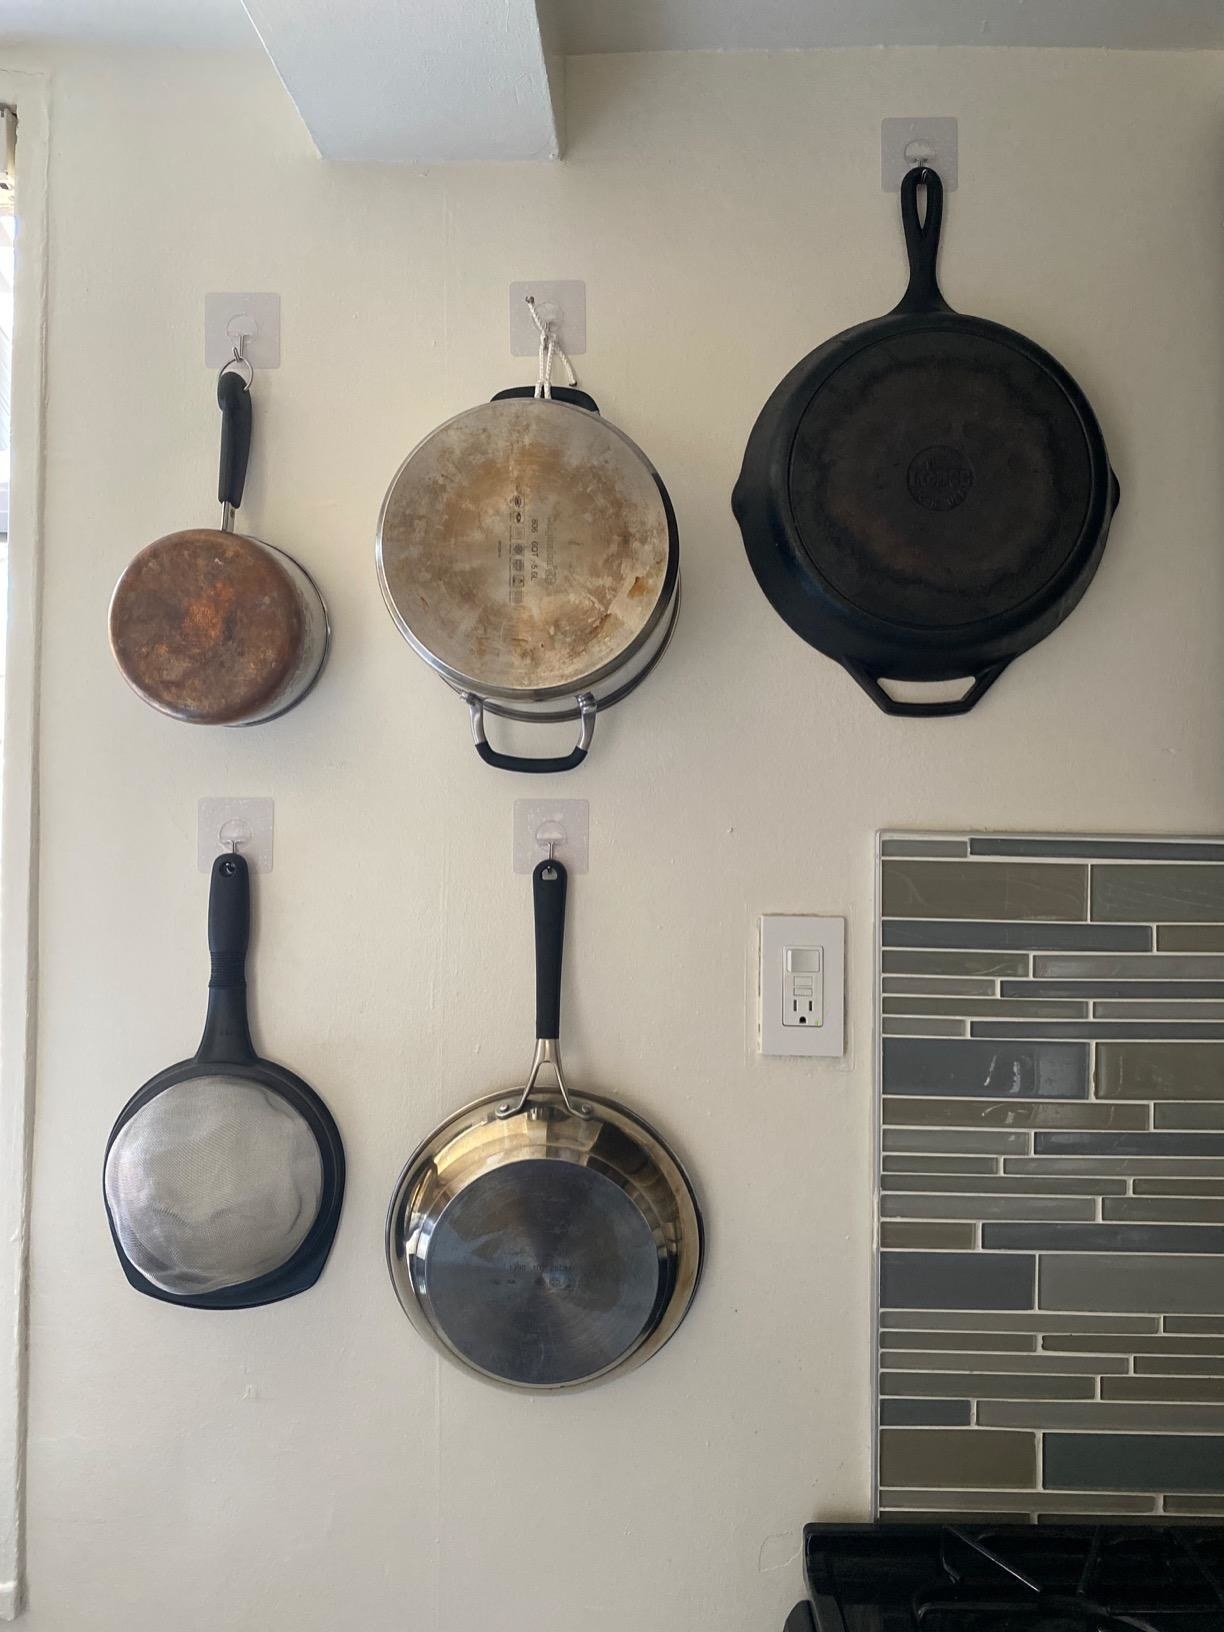 Heavy metal pots and pans hanging from reusable wall hooks